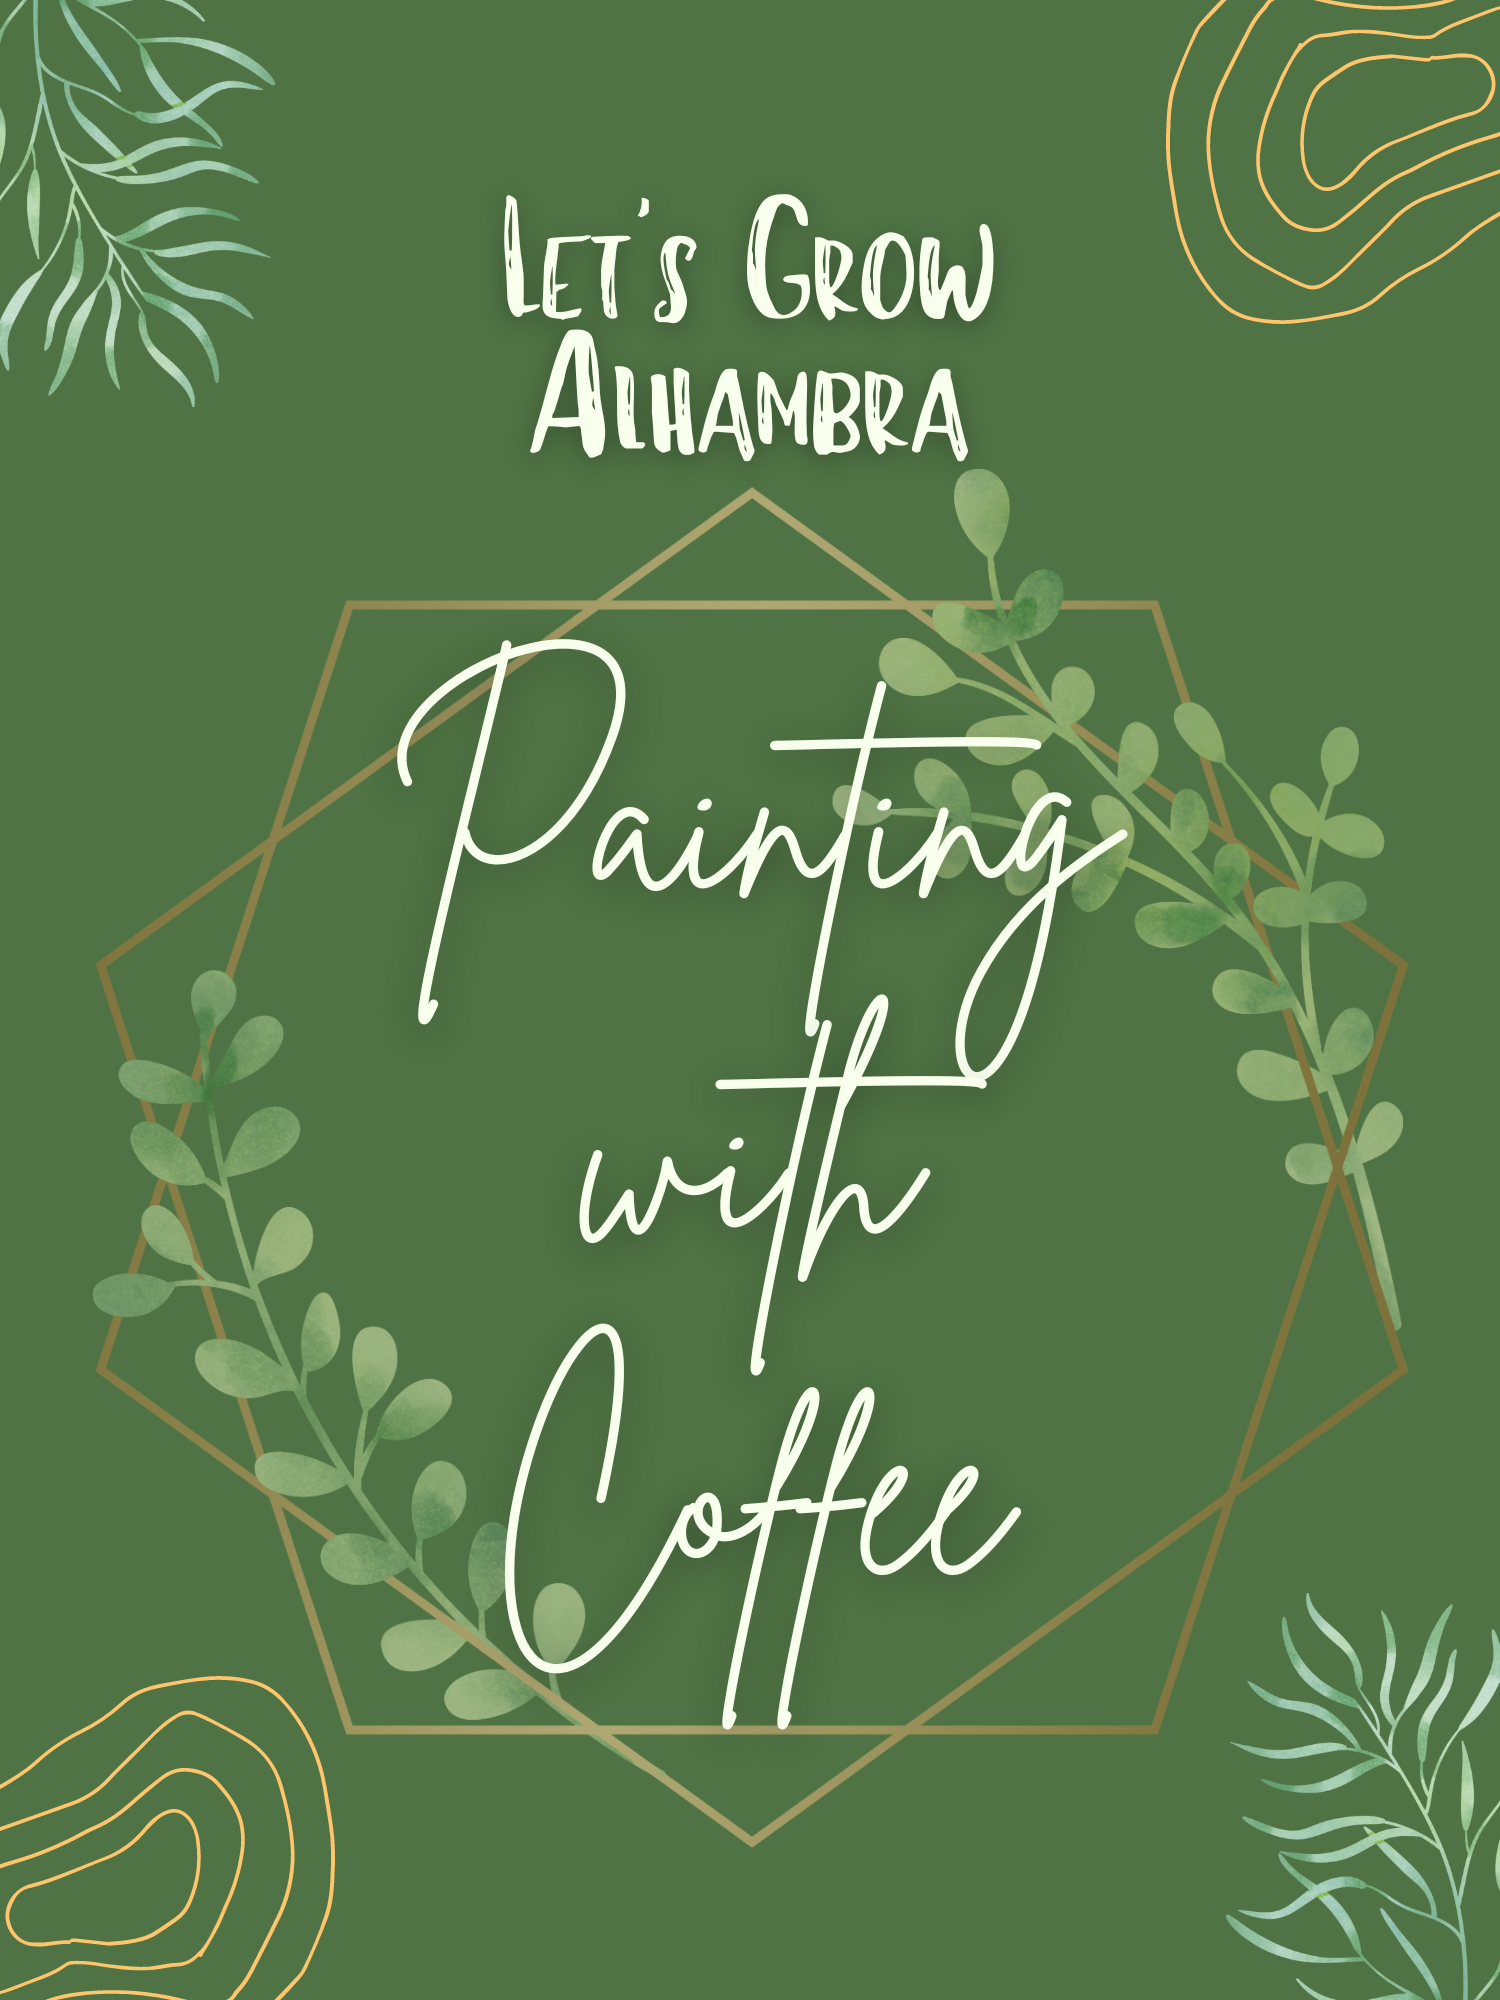 painting with coffee self help graphics